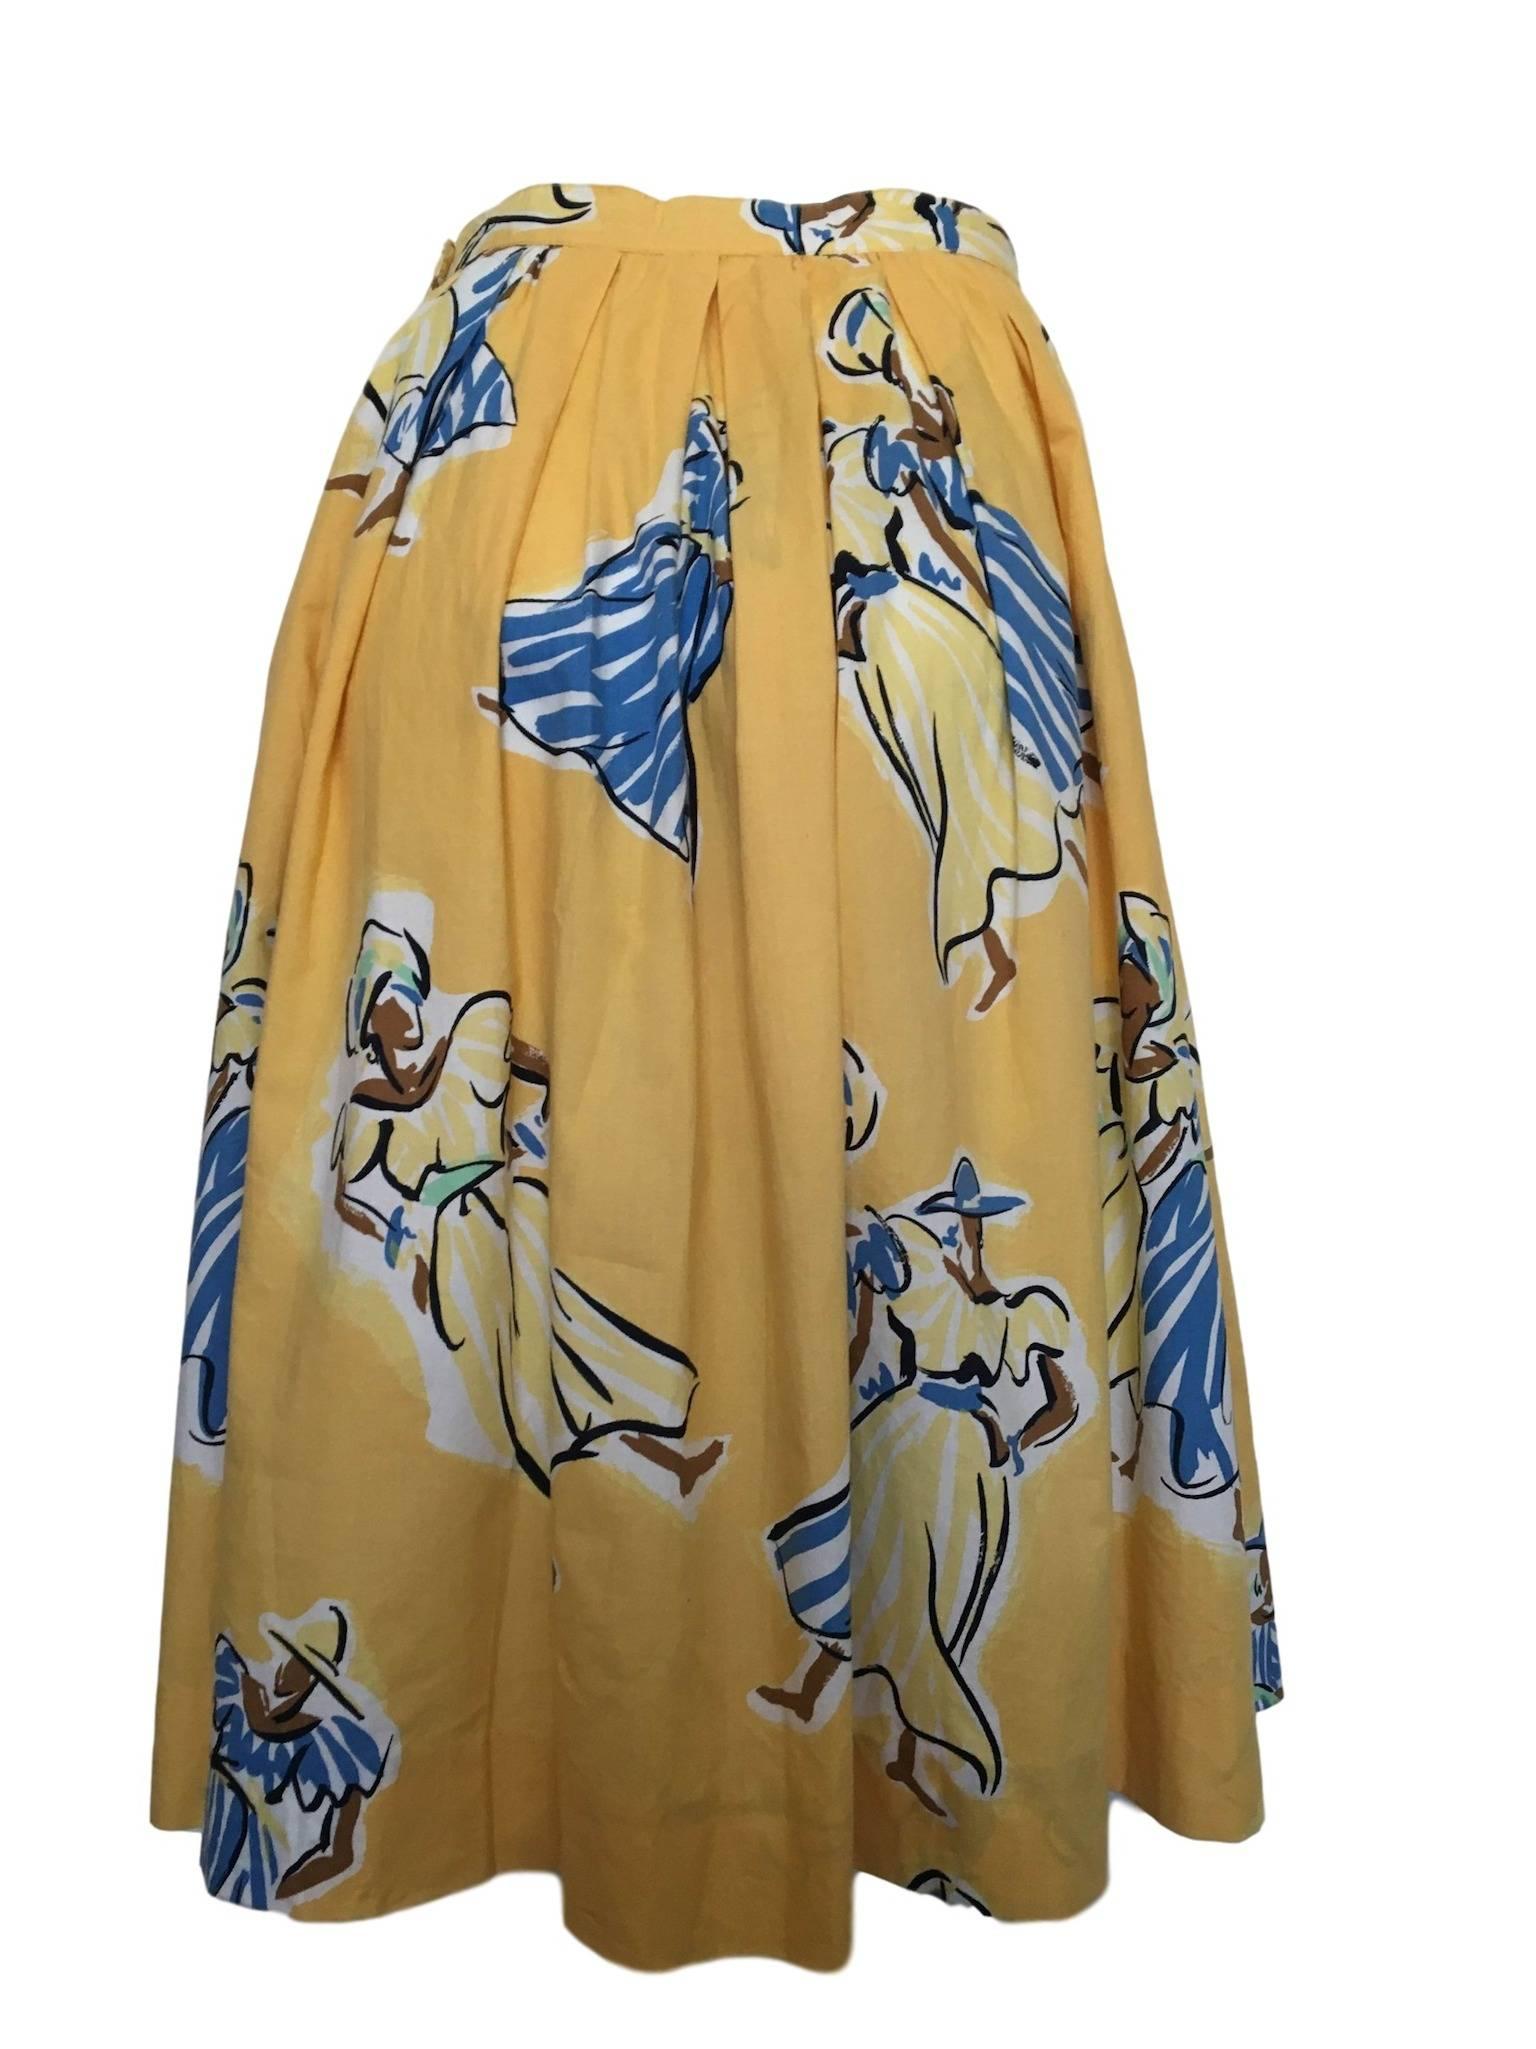 Vintage Gerard Darel novelty print cotton skirt, 1980s era, with African ladies wearing long dresses, hats and turbans on a bright sunshine yellow background. Fastens with buttons on waist.

Measures 14 inches across waist band and 27 inches length.